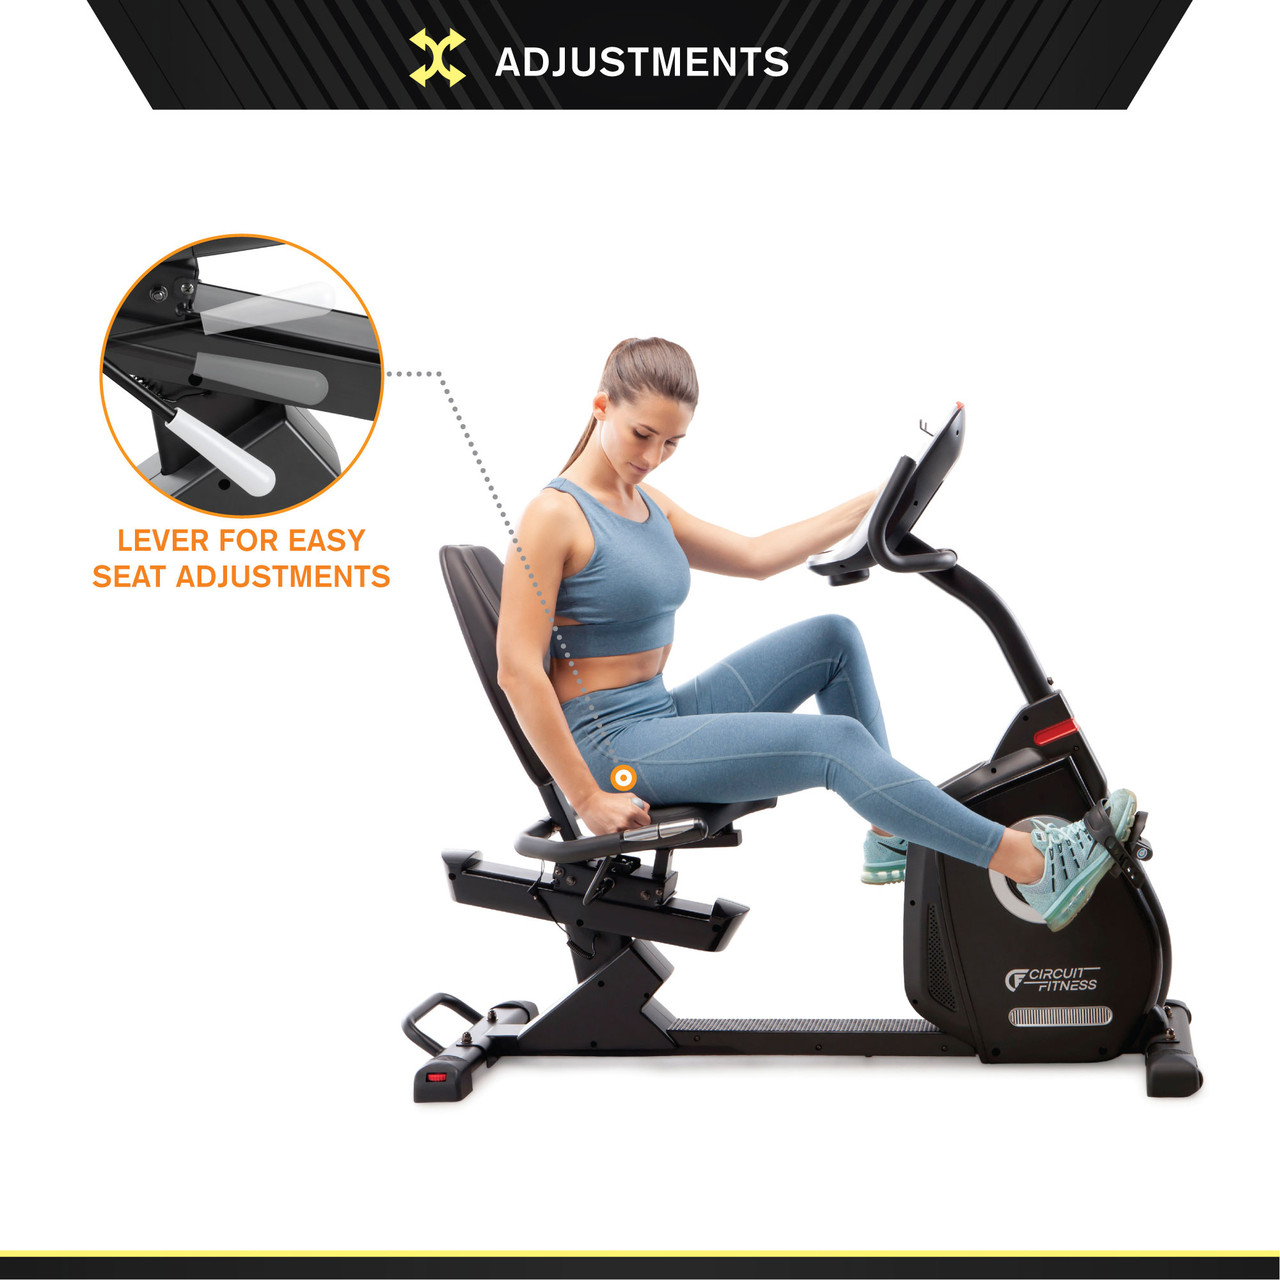 The Regenerating Magnetic Recumbent Bike | Marcy ME-706 includes transport wheels for convenient moving